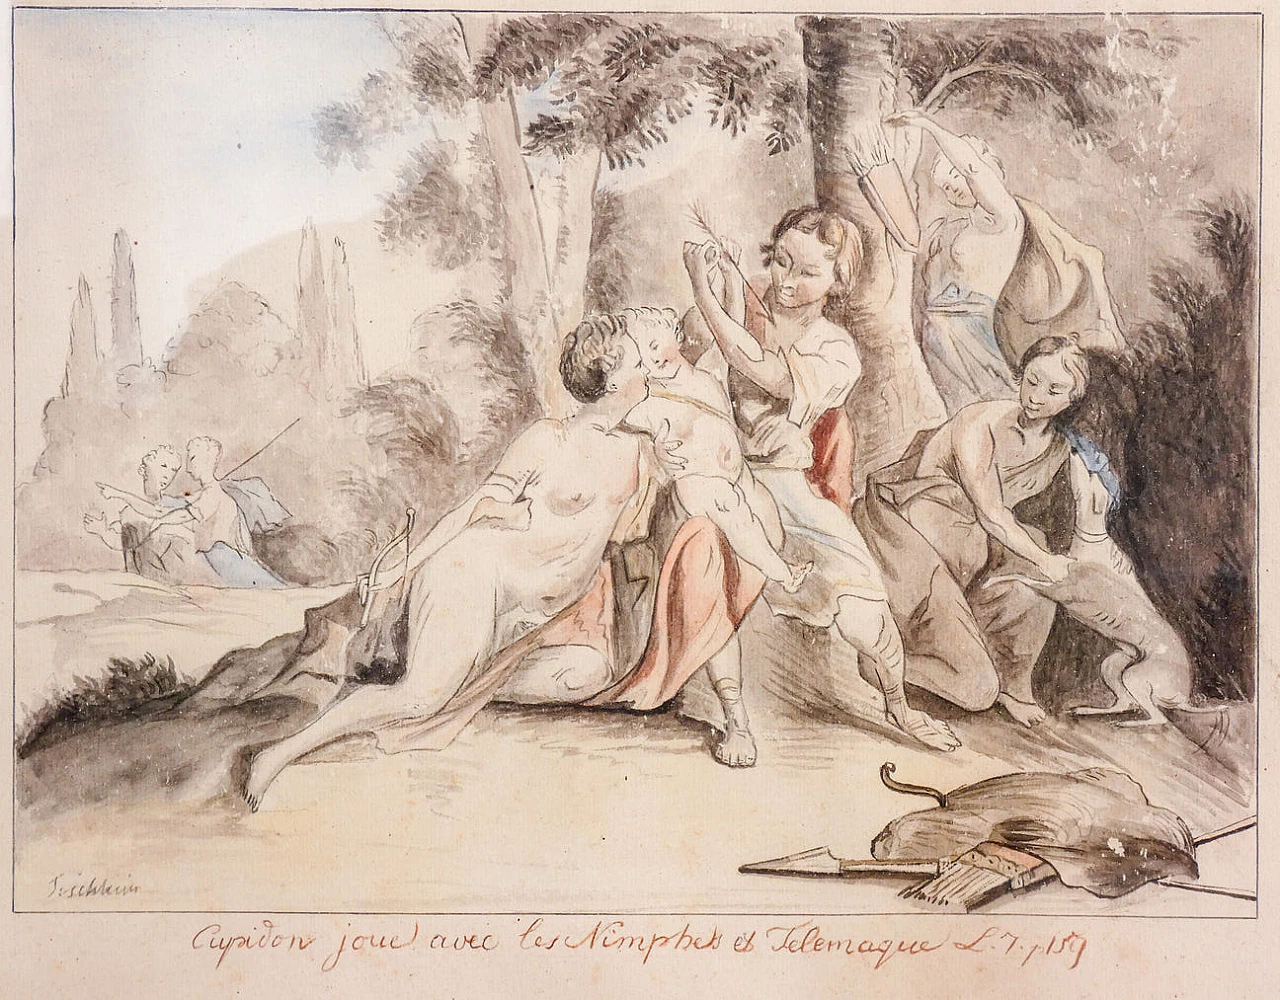 Cupid playing with the Nimphes and Telemachus, watercolour and pencil on paper, 19th century 2